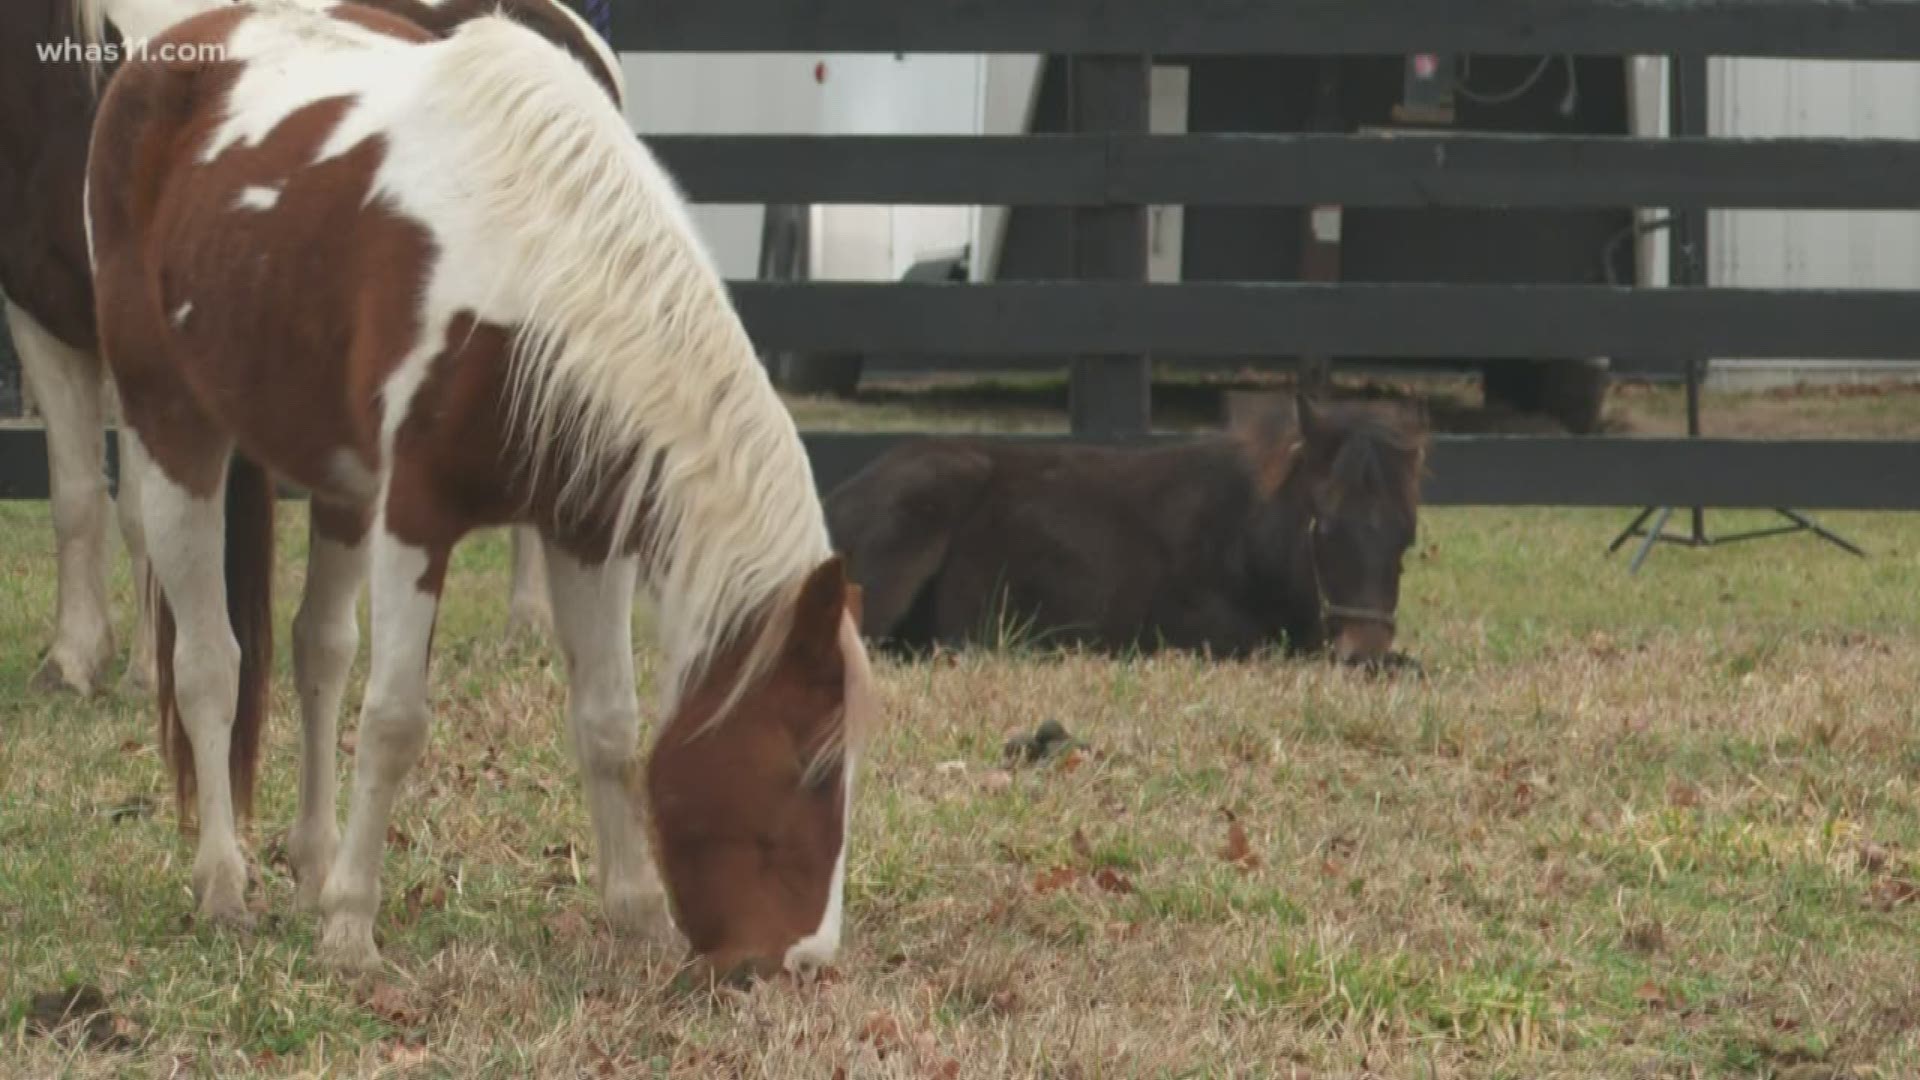 The horse, named Diamond, arrived at Willow Hope Farm in Simpsonville Saturday evening. The farm serves as the home to the Humane Society's equine recovery program.